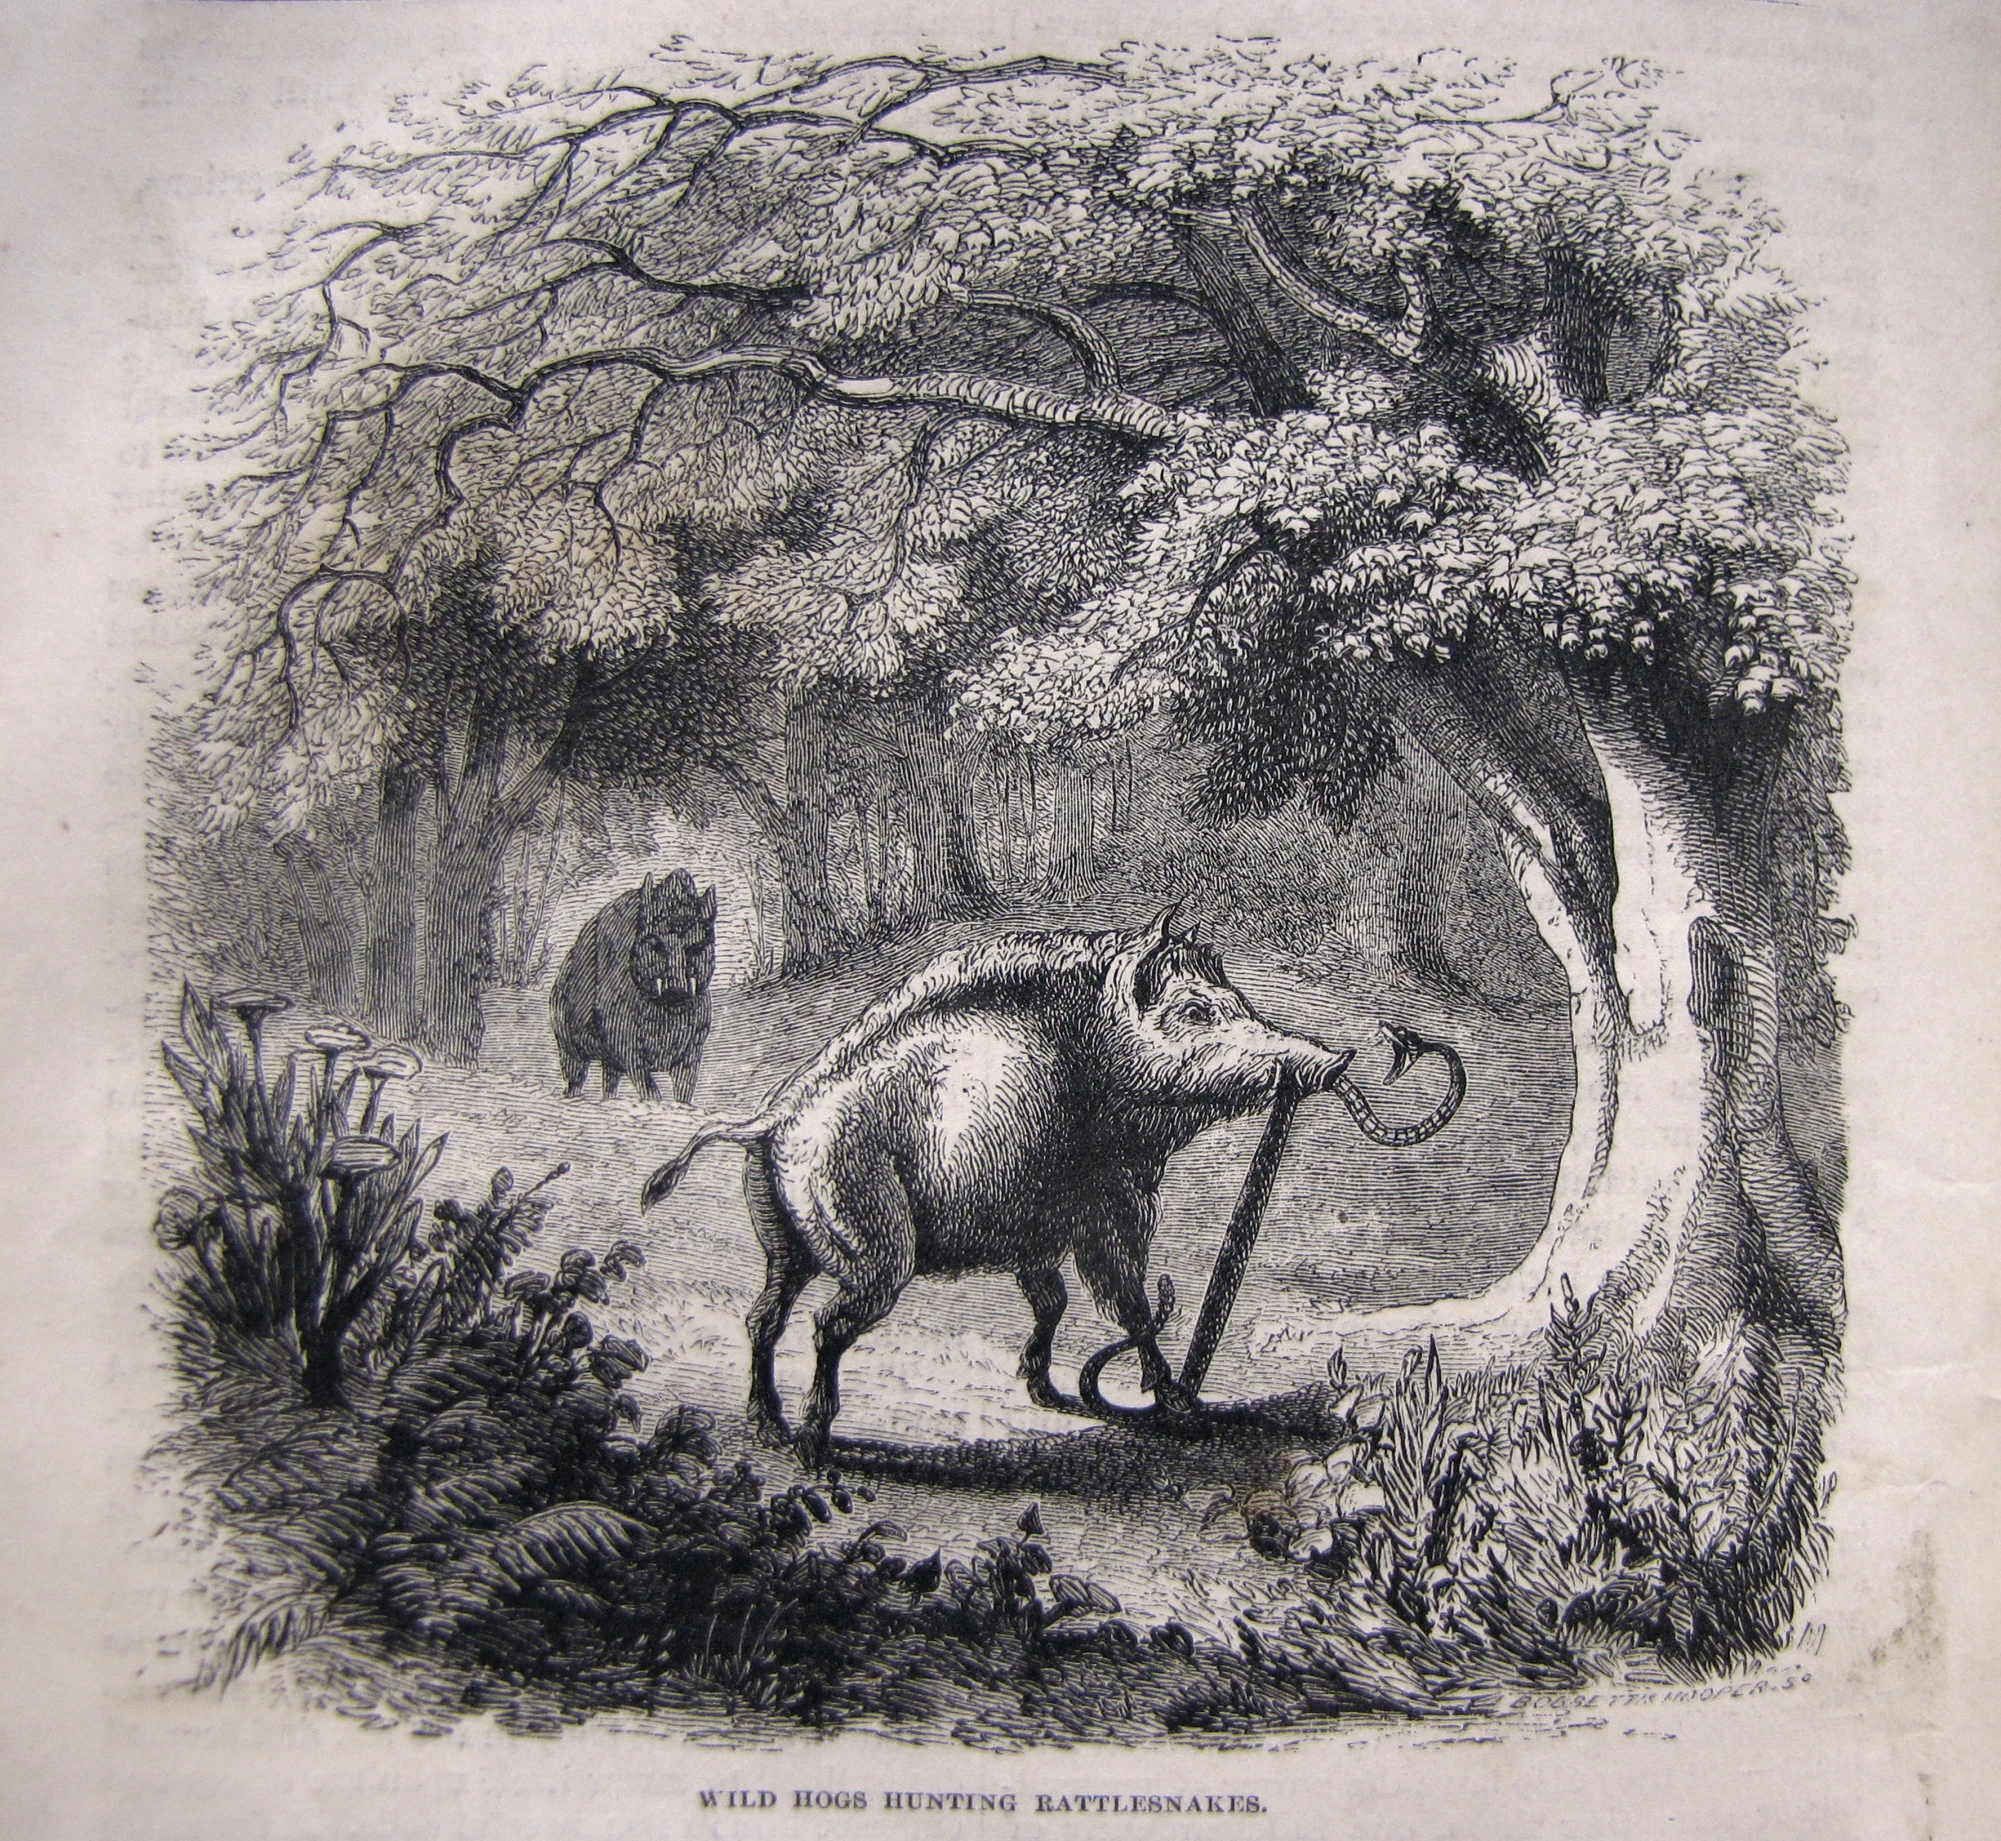 the old illustration depicts an animal and man